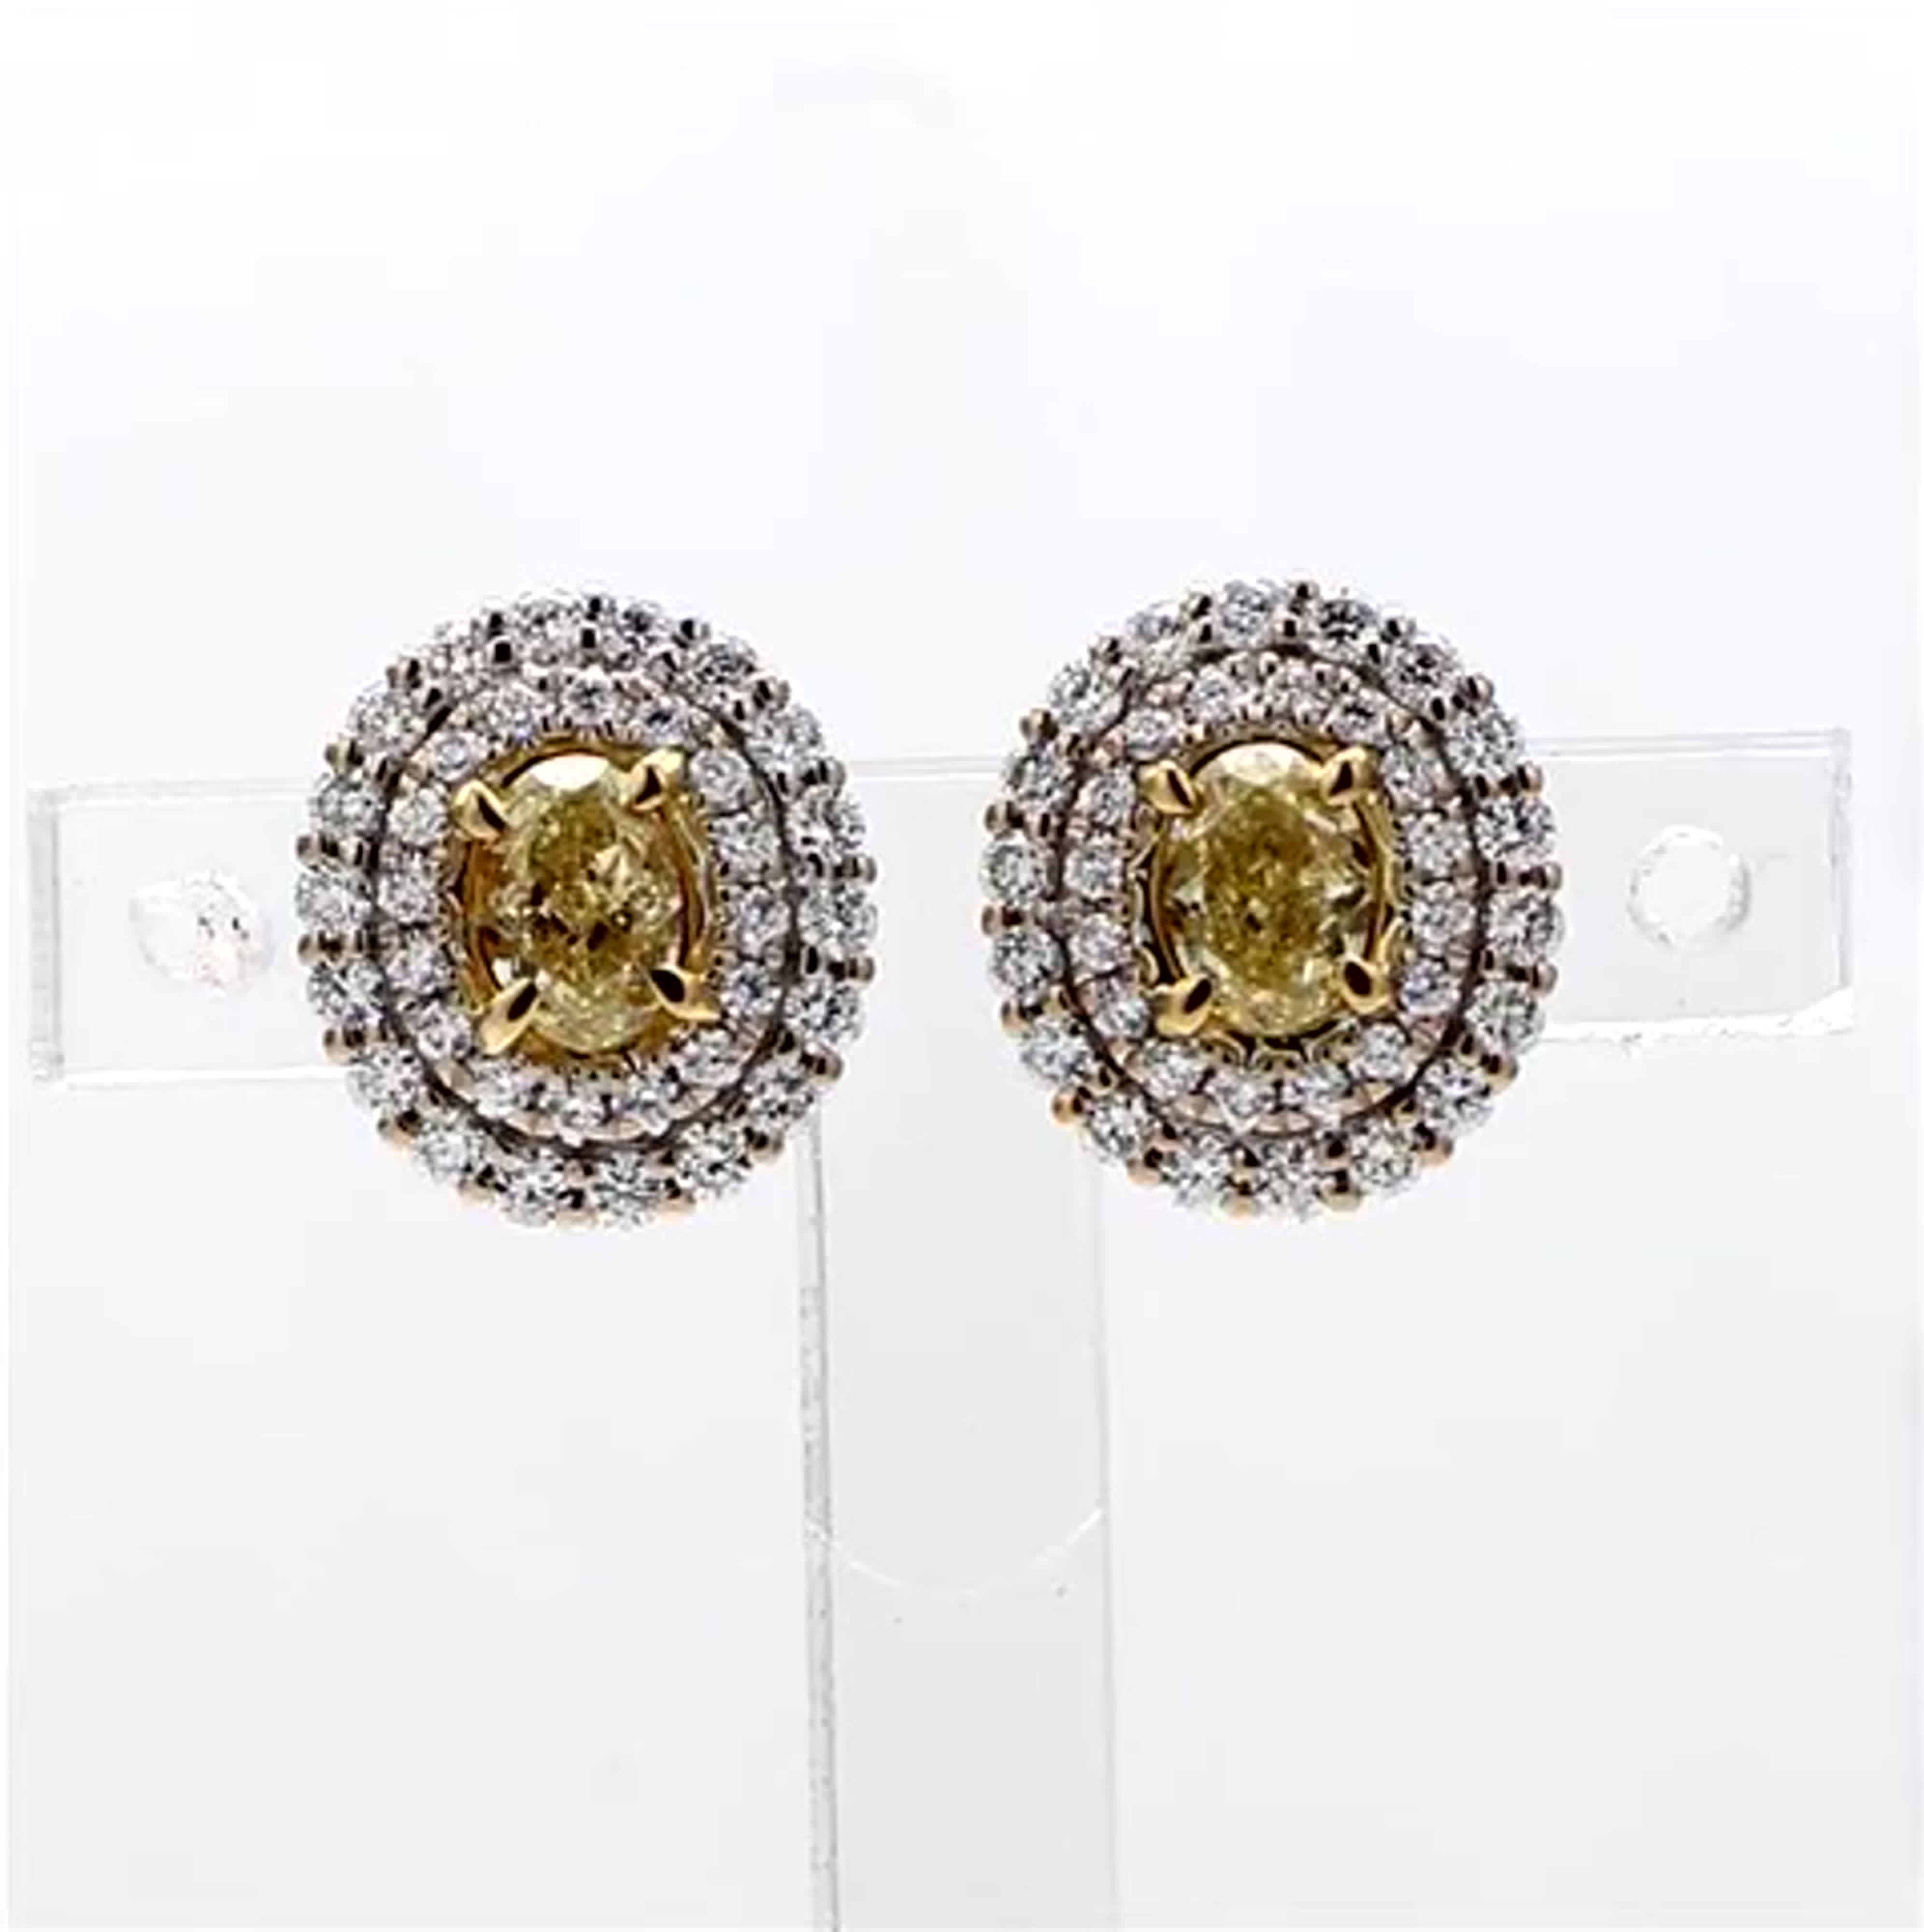 Natural Yellow Oval and White Diamond 1.02 Carat TW Gold Stud Earrings